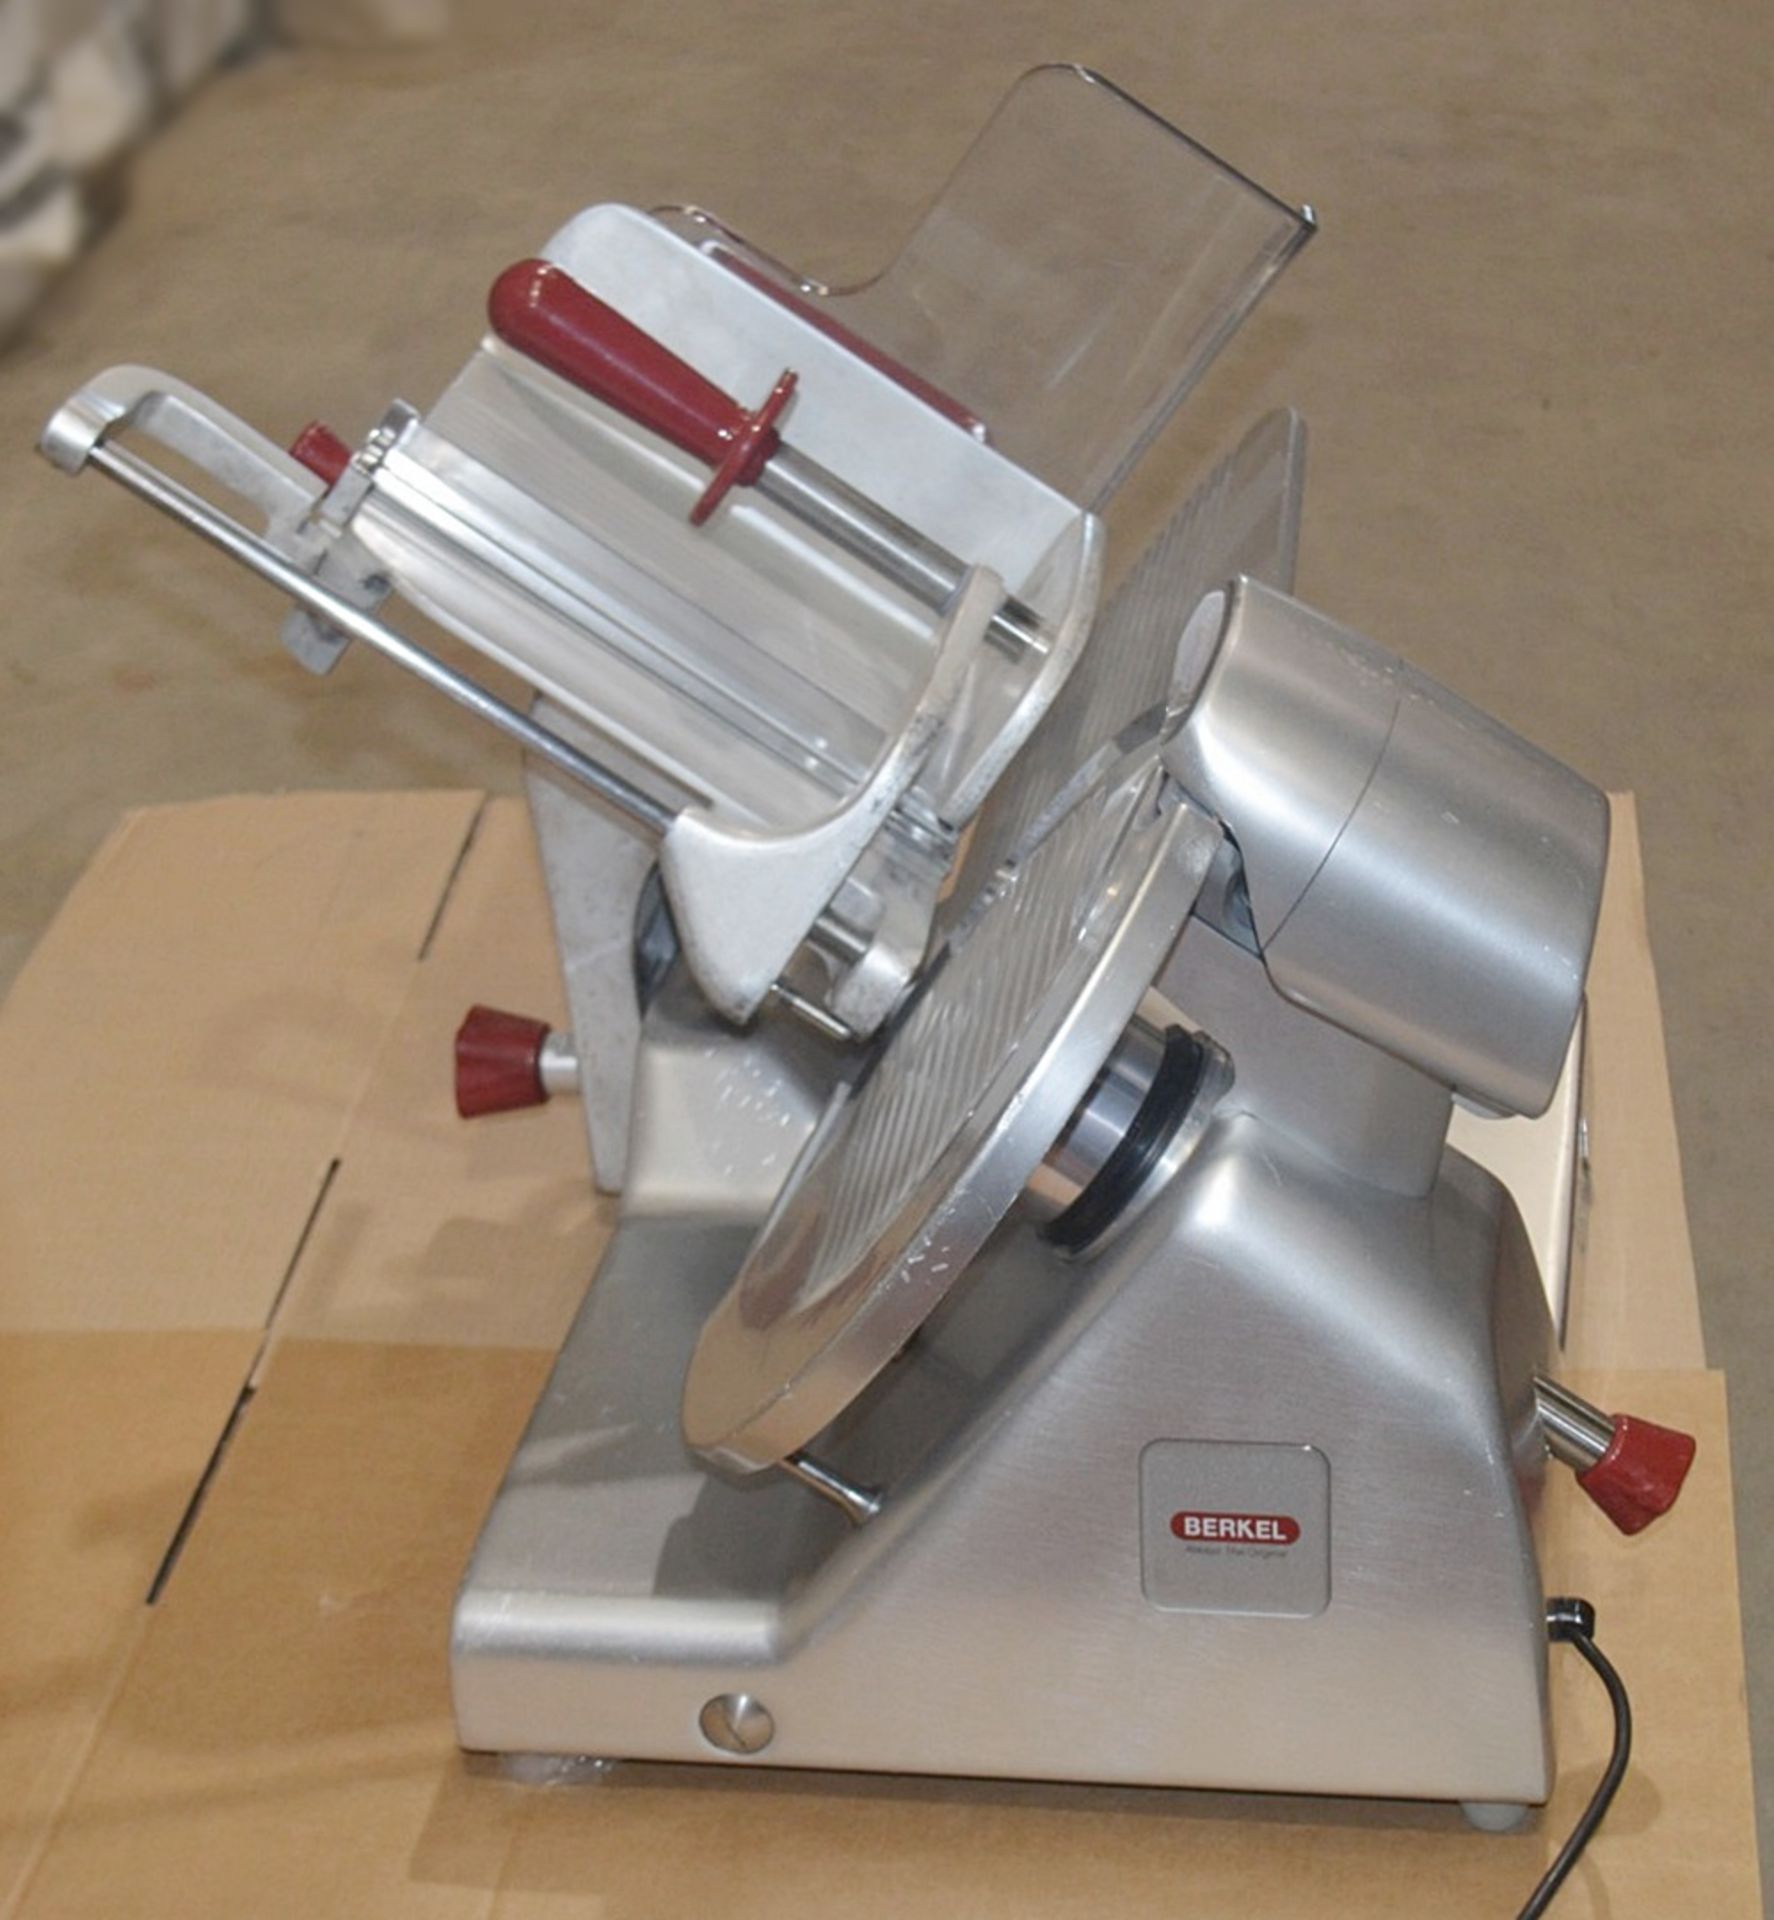 1 x AVERY BERKEL Commercial Meat Slicer In Stainless Steel - Dimensions: H54 x W52 x D42cm - Very - Image 9 of 10